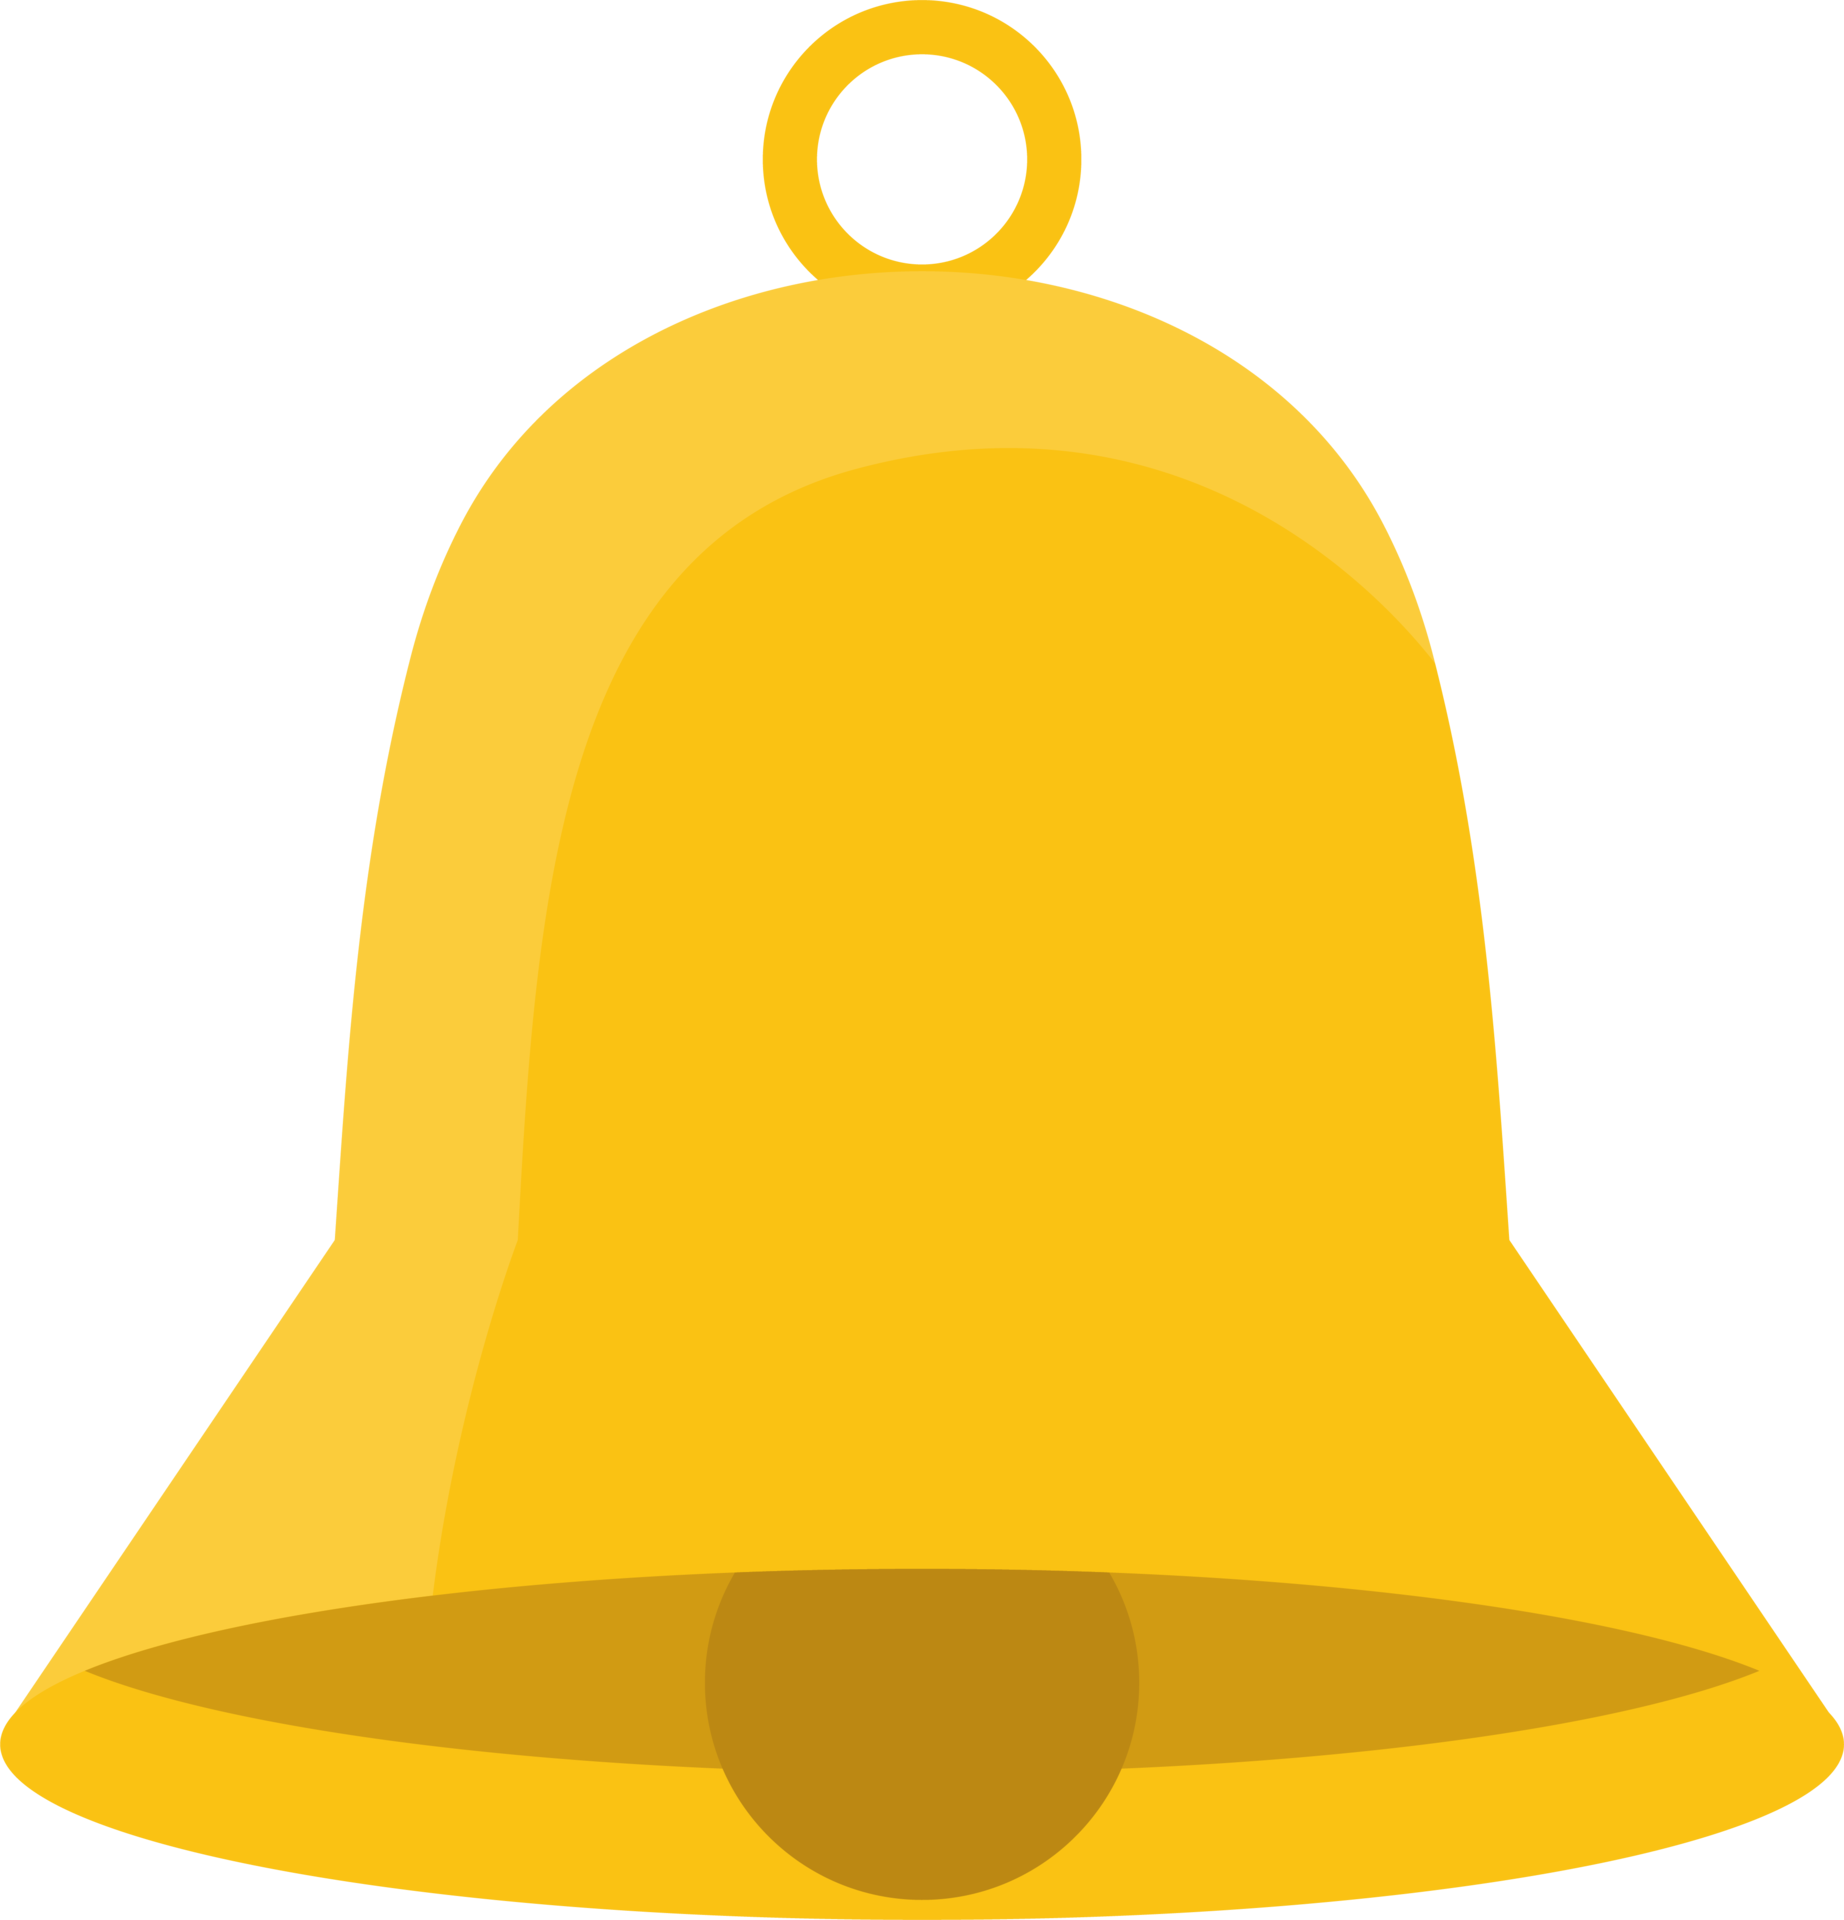 Bell PNG Free Images with Transparent Background - (3,843 Free Downloads)